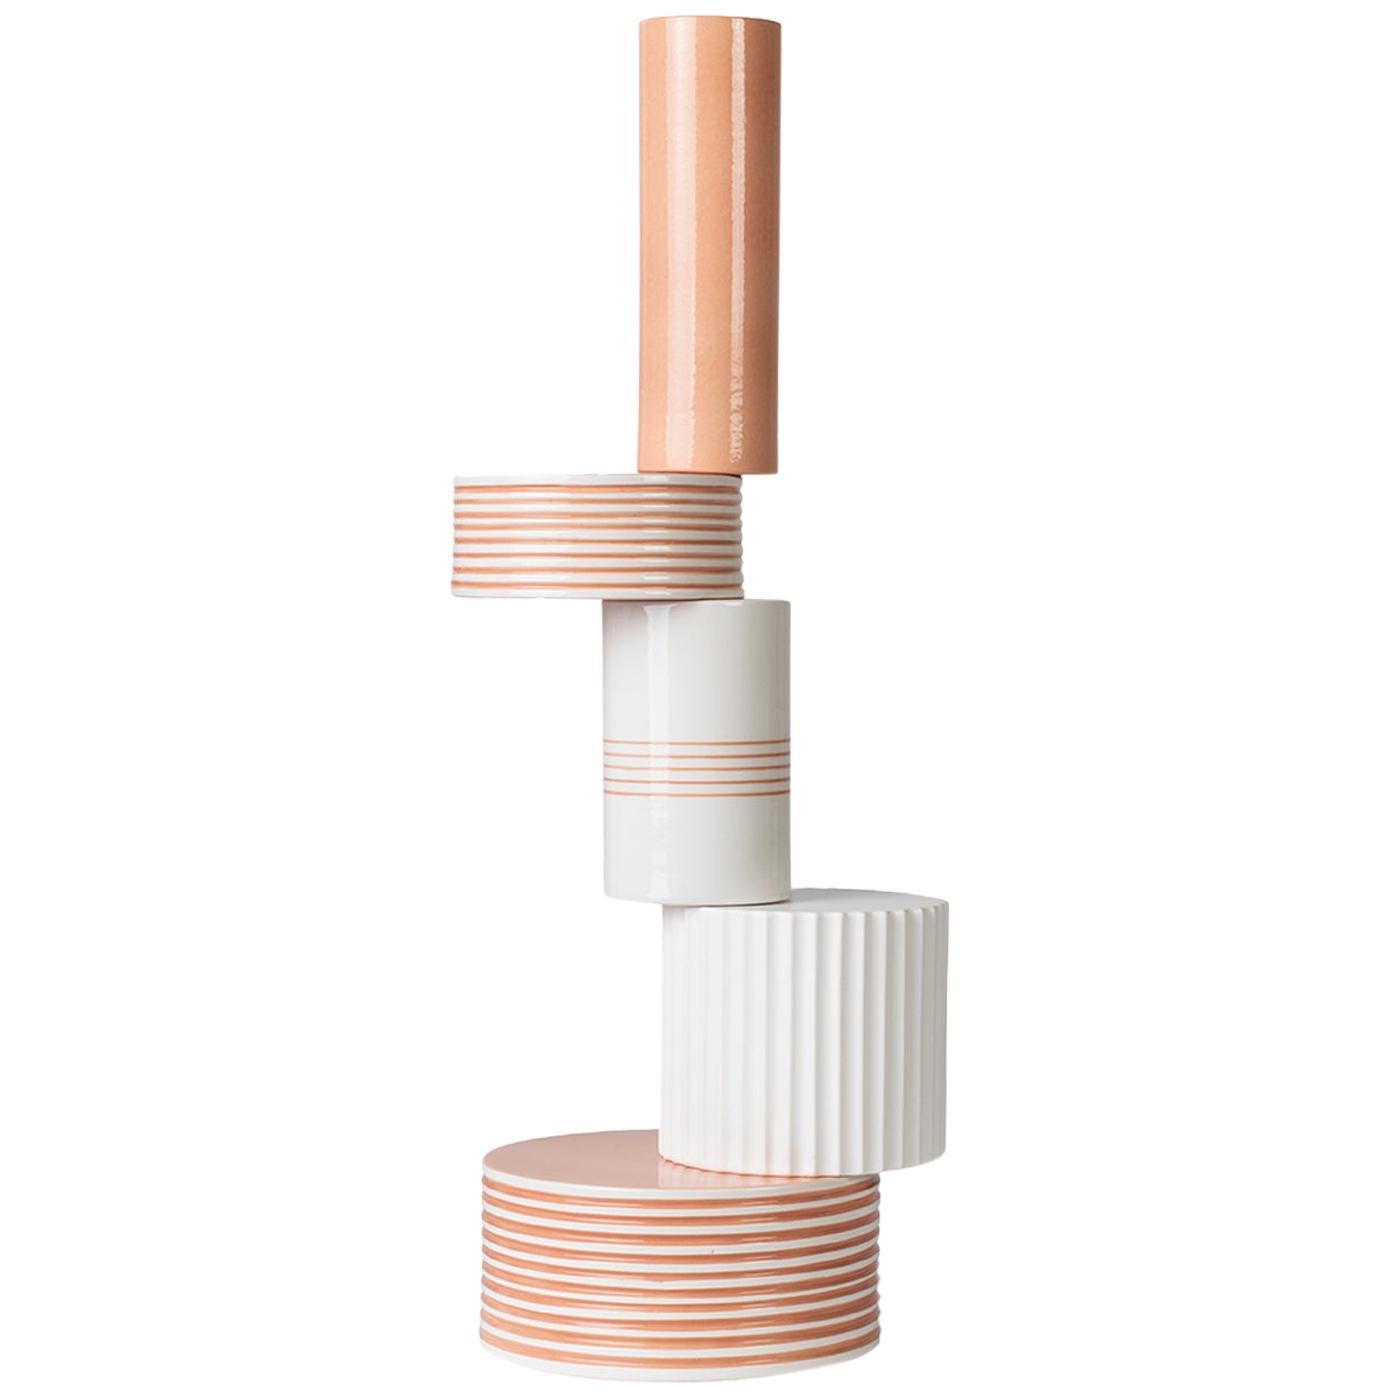 5-Element White and Terracotta Vase by Quincoces-Dragò 